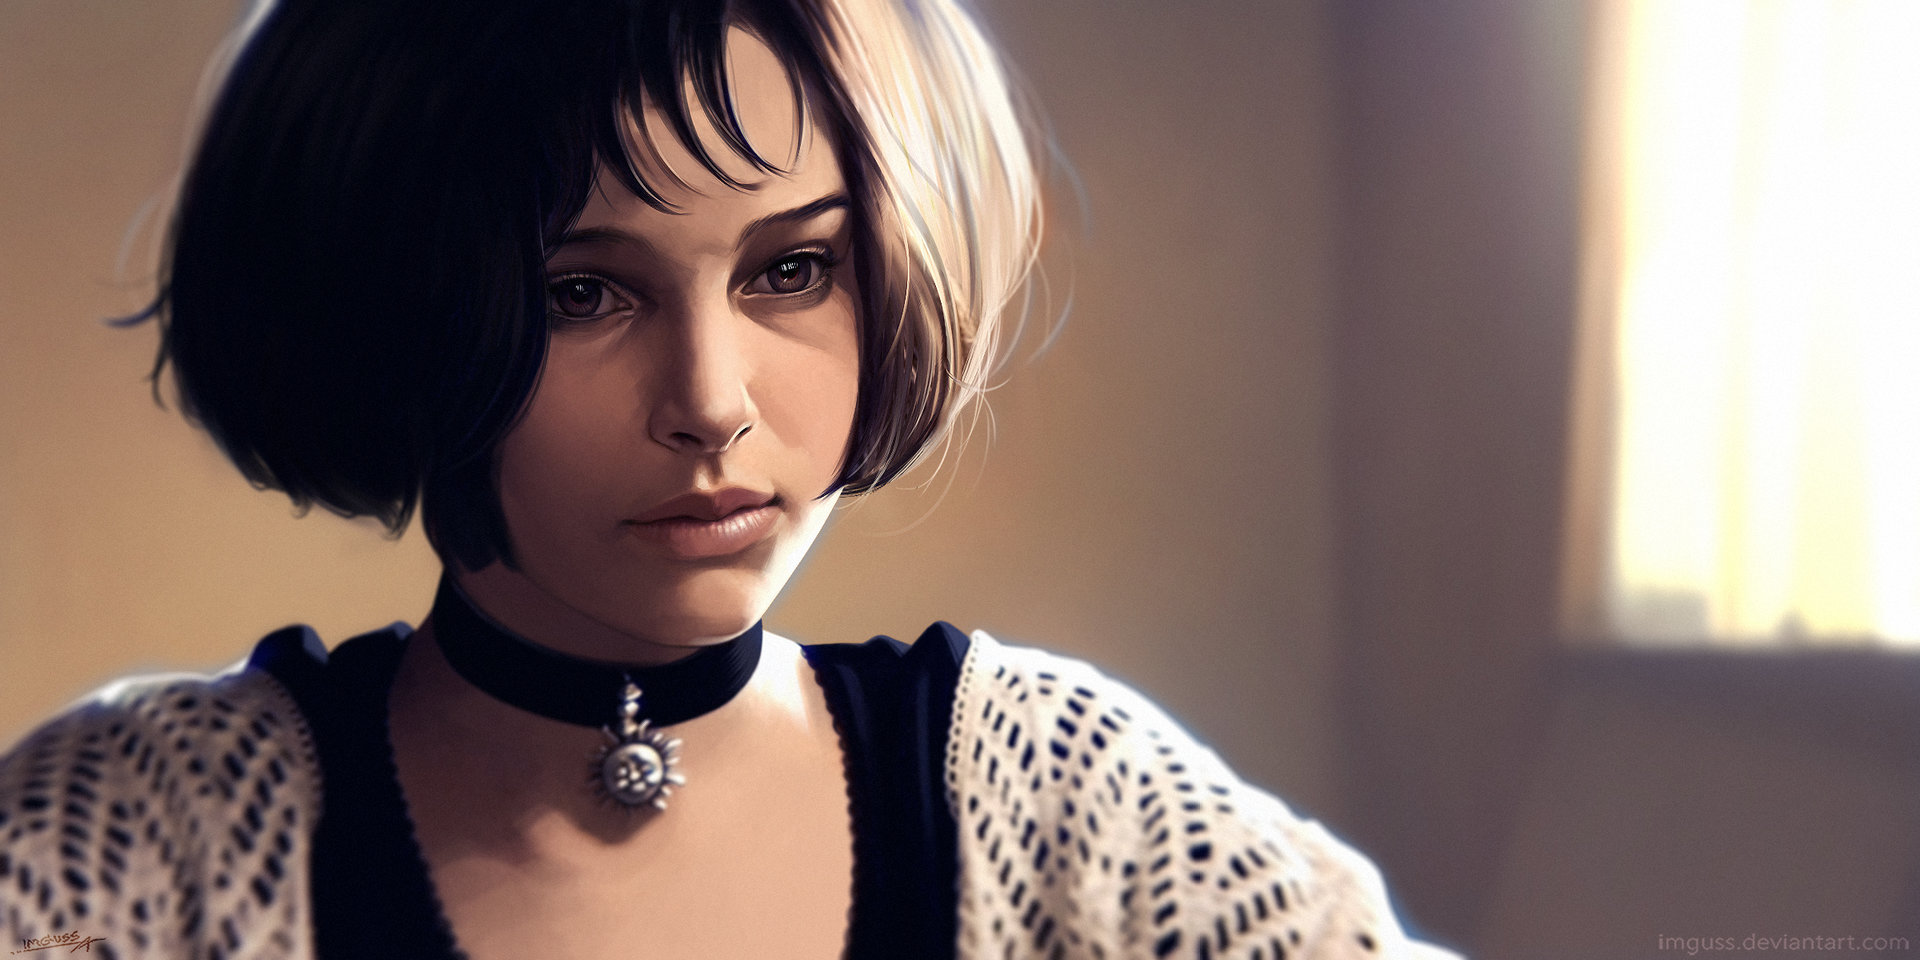 General 1920x960 Mathilda Leon: The Professional Natalie Portman artwork movie characters actress movies Luc Besson